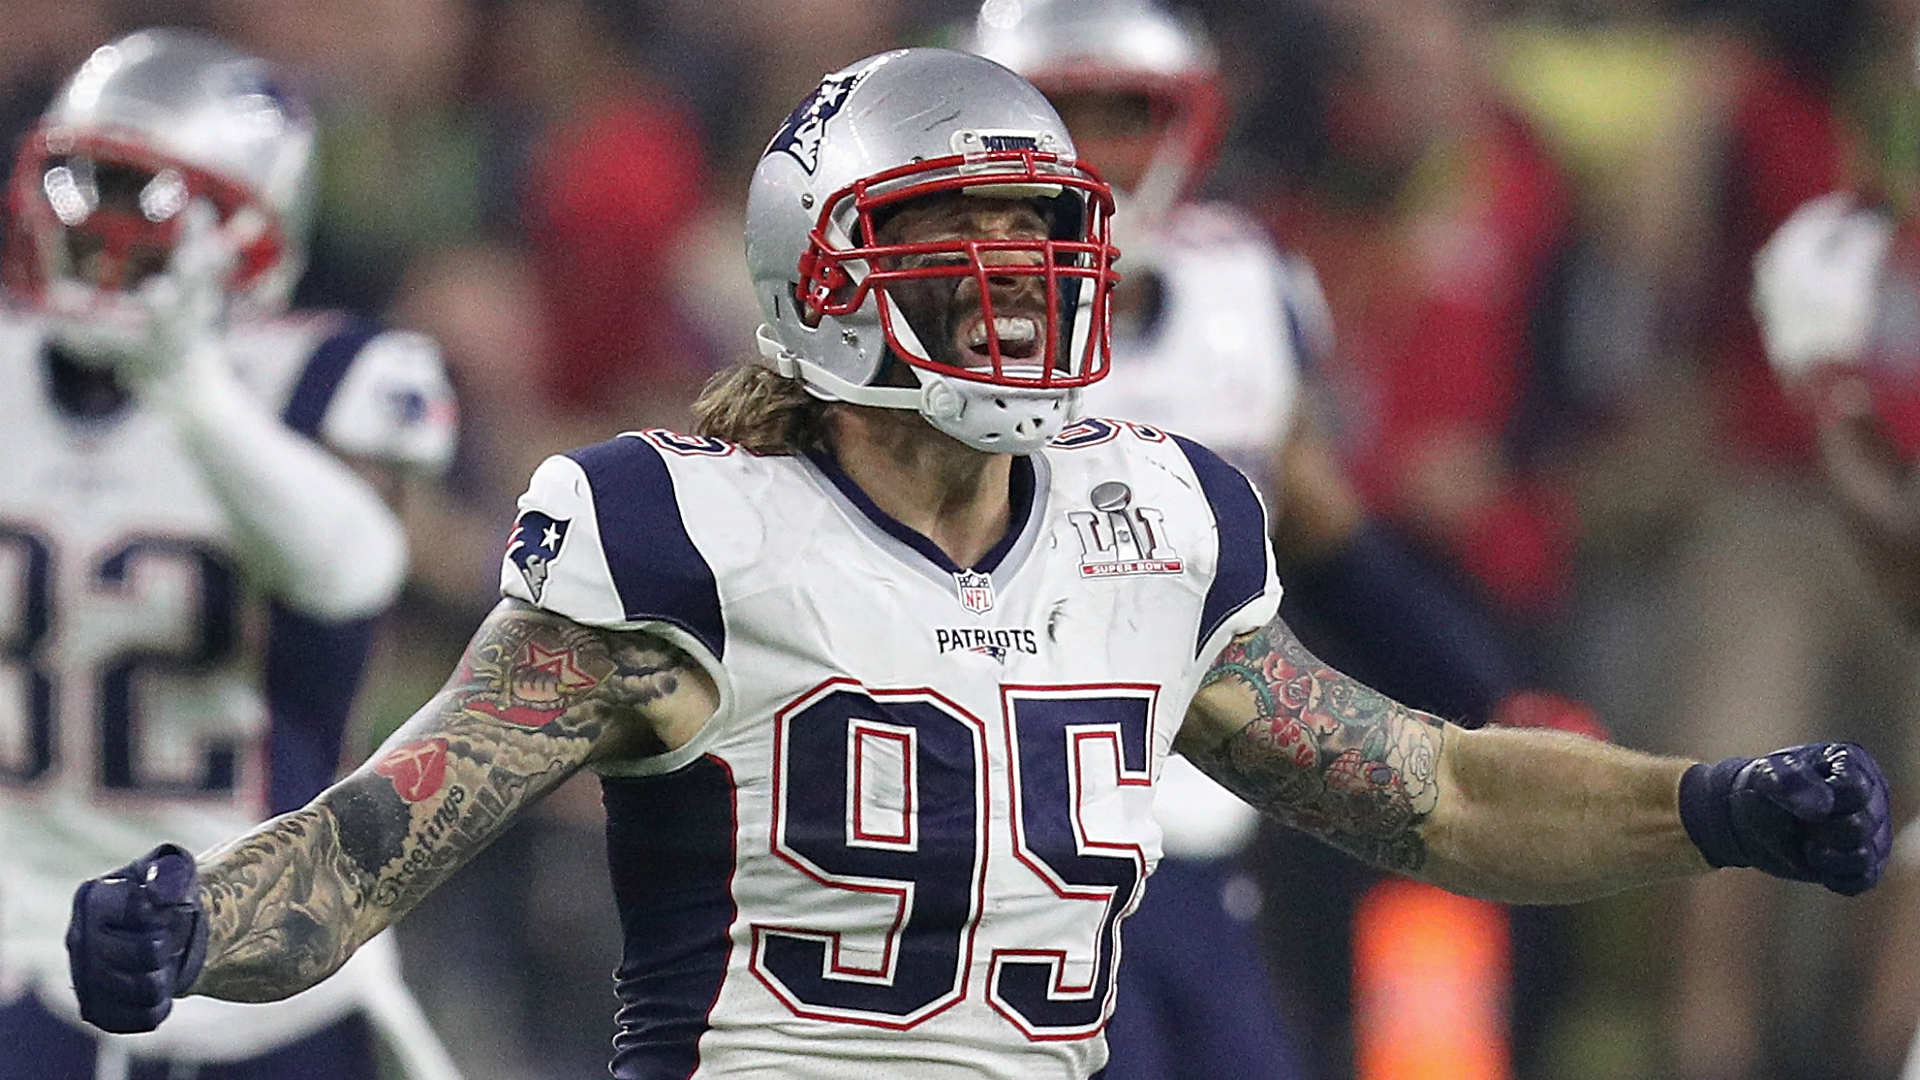 NFL free agency: Chris Long signs with Eagles on his 32nd birthday